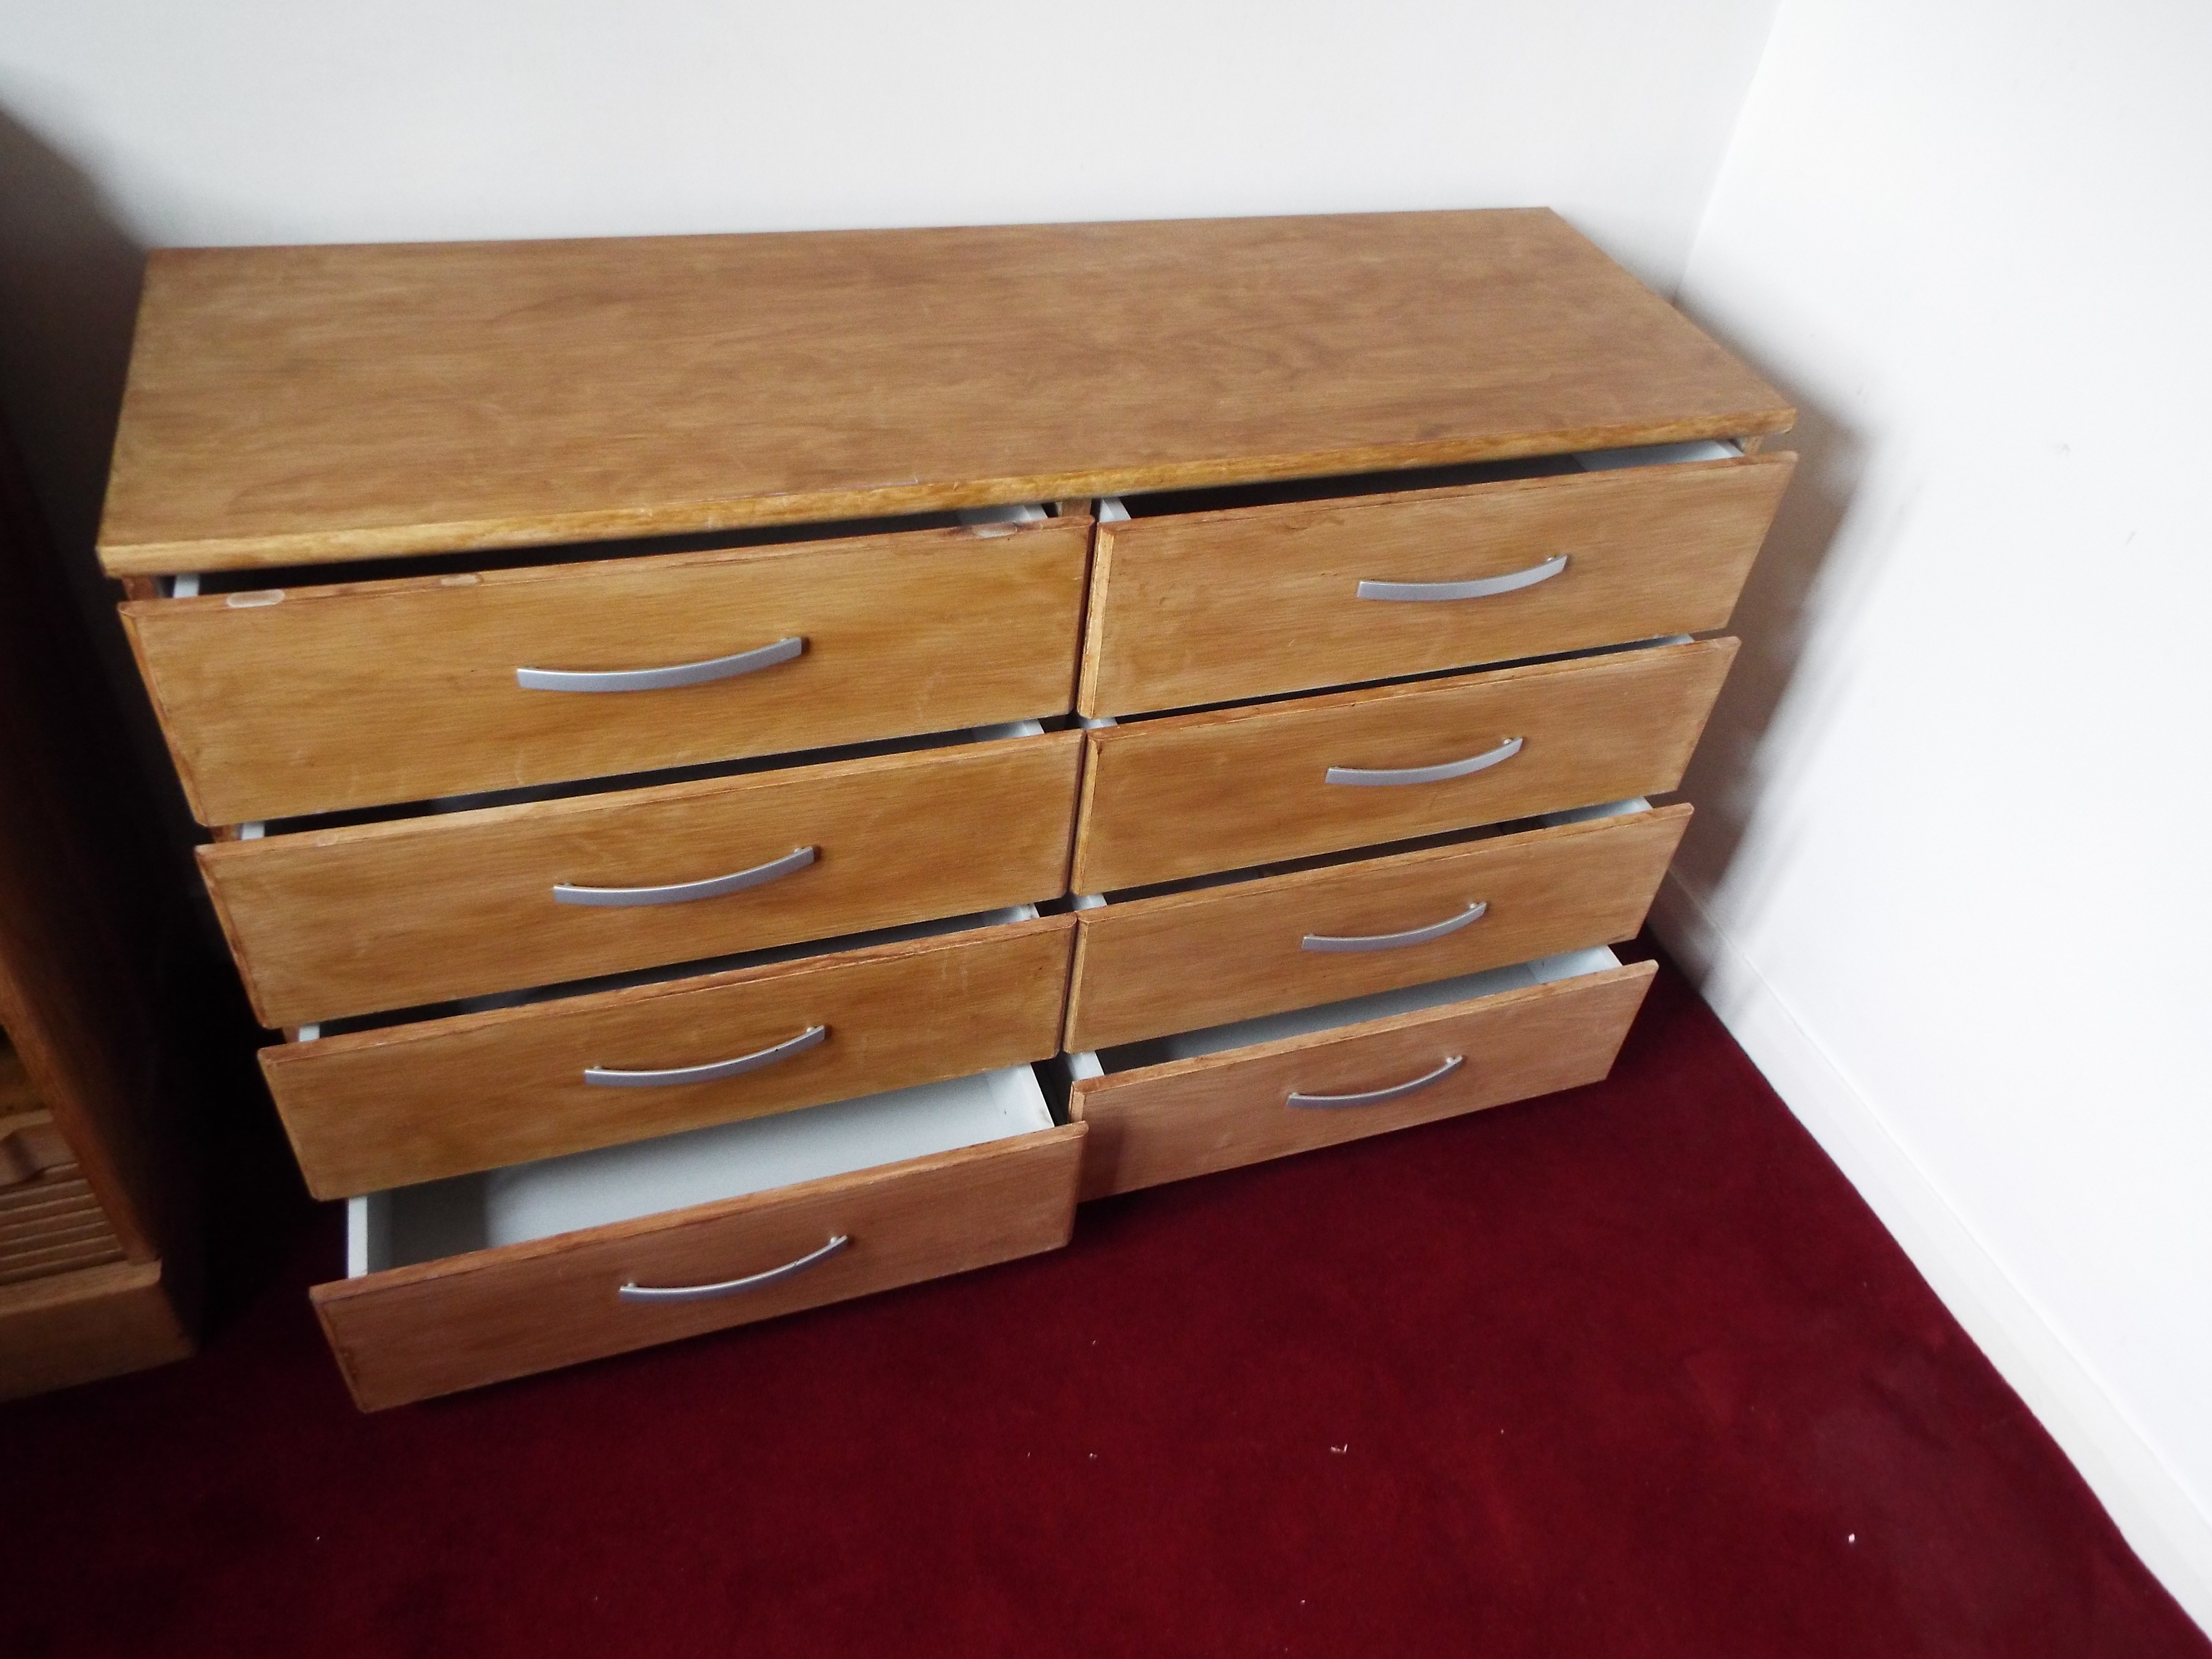 A chest of eight drawers measuring approximately 74 cm 162 cm x 40 cm. - Image 3 of 3